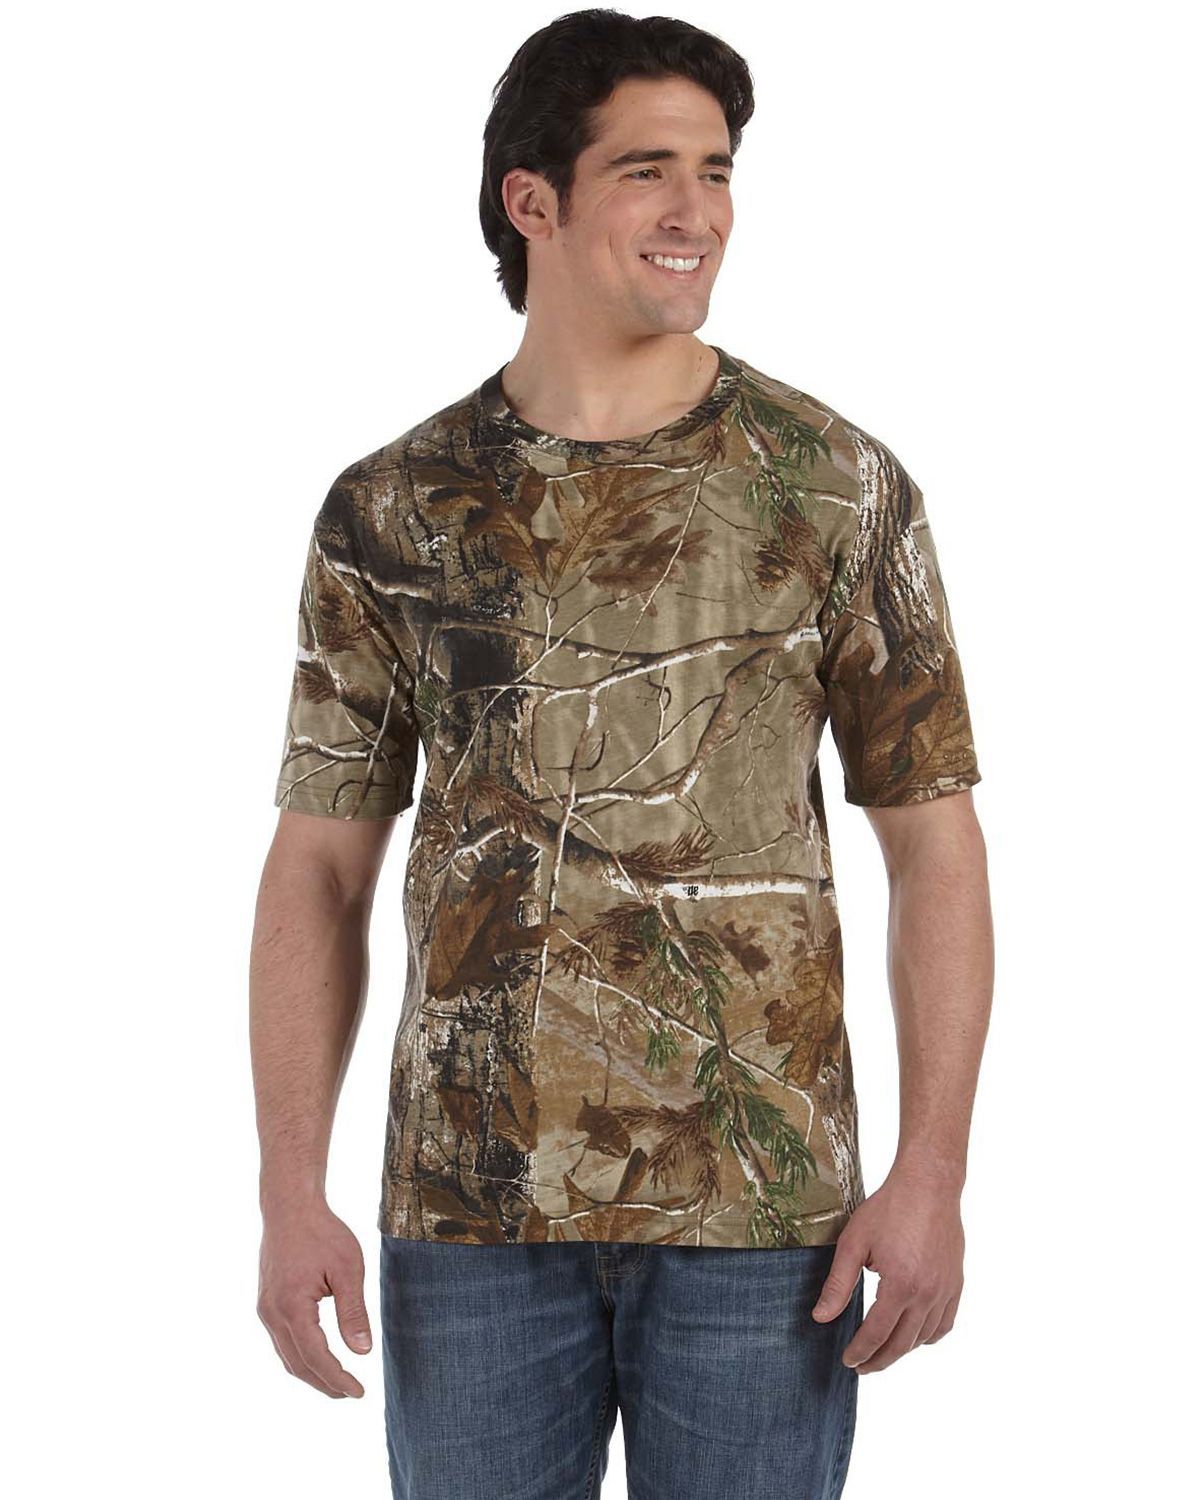 Children's Camouflage T-Shirt RealTree Print Forest Camo Short Sleeve Top 3-13Yr